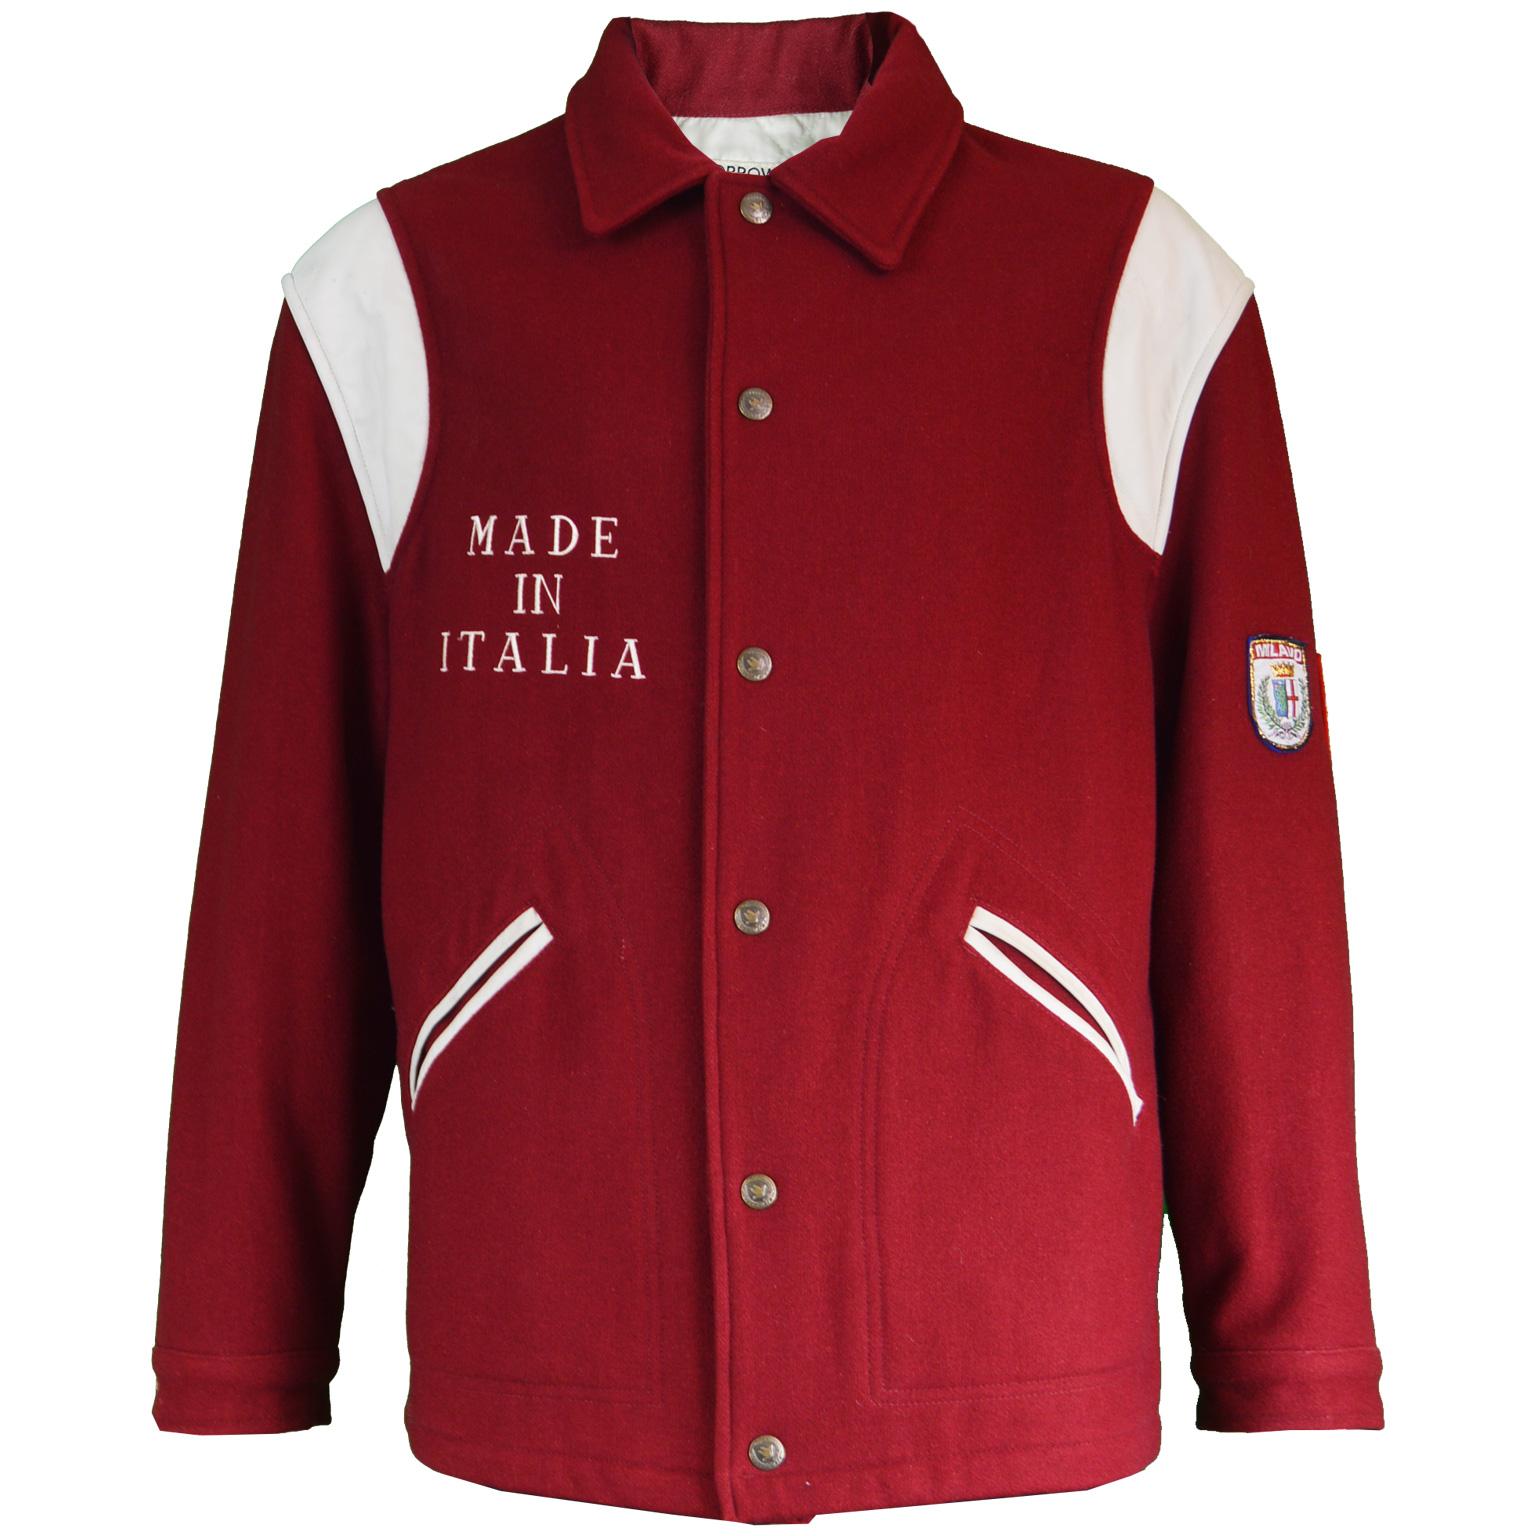 Moschino Vintage 'Made in Italia' Wool & Faux Leather Mens Letterman Jacket